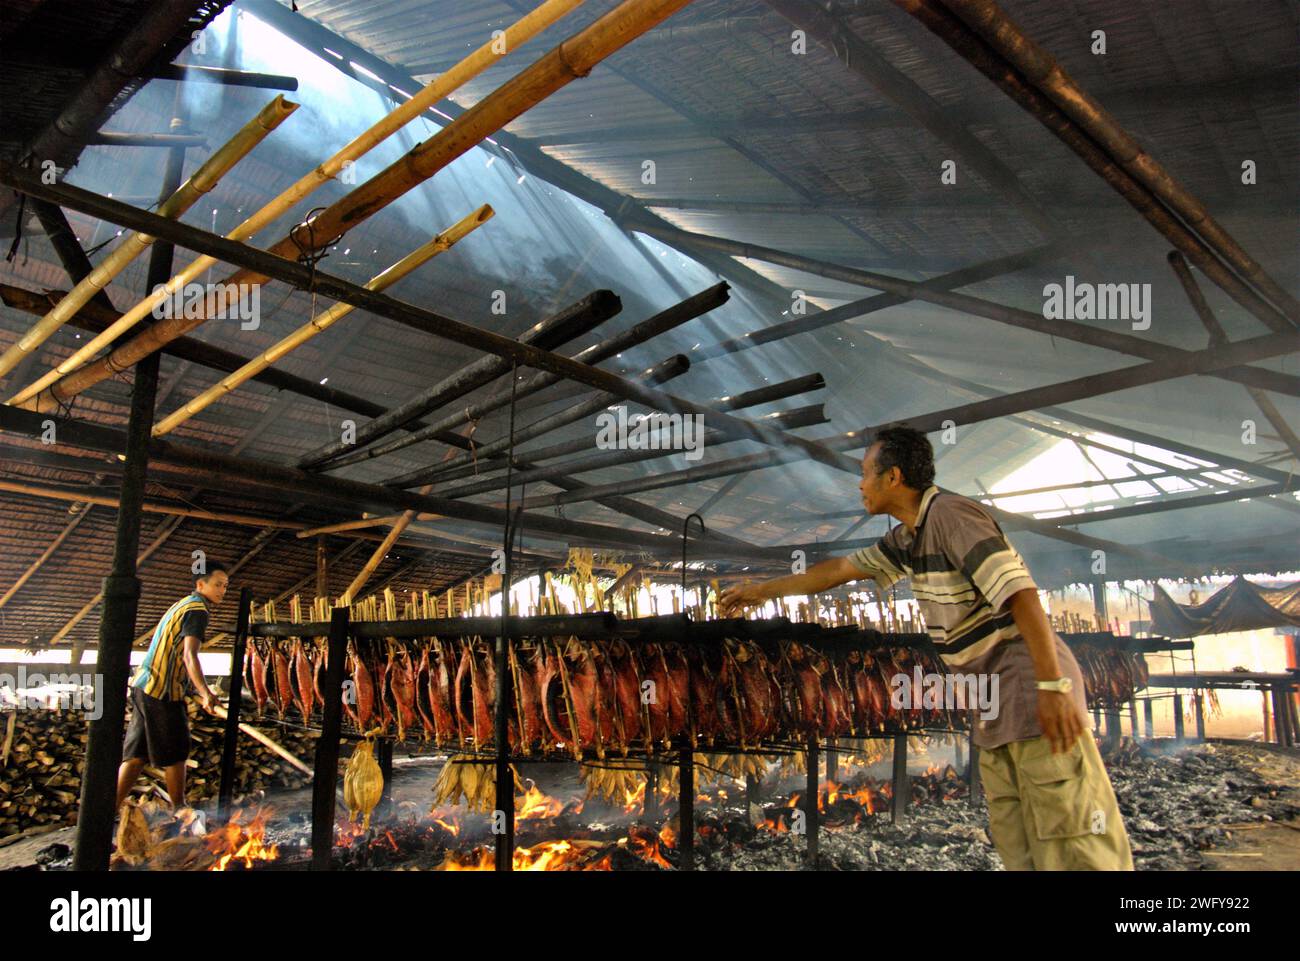 A smoked fish production that uses skipjack tuna meats at a home industry in Bitung, North Sulawesi, Indonesia. The contributions of indigenous people to technological innovation offer a wide array of options for management of, among others, food security, according to the 2023 report of Intergovernmental Panel on Climate Change (IPCC). Popularly known as cakalang fufu, the smoked tuna fish is considered an exotic indigenous food, a part of skipjack tuna fish production that is one of the most important economic activities in Bitung City area. Stock Photo